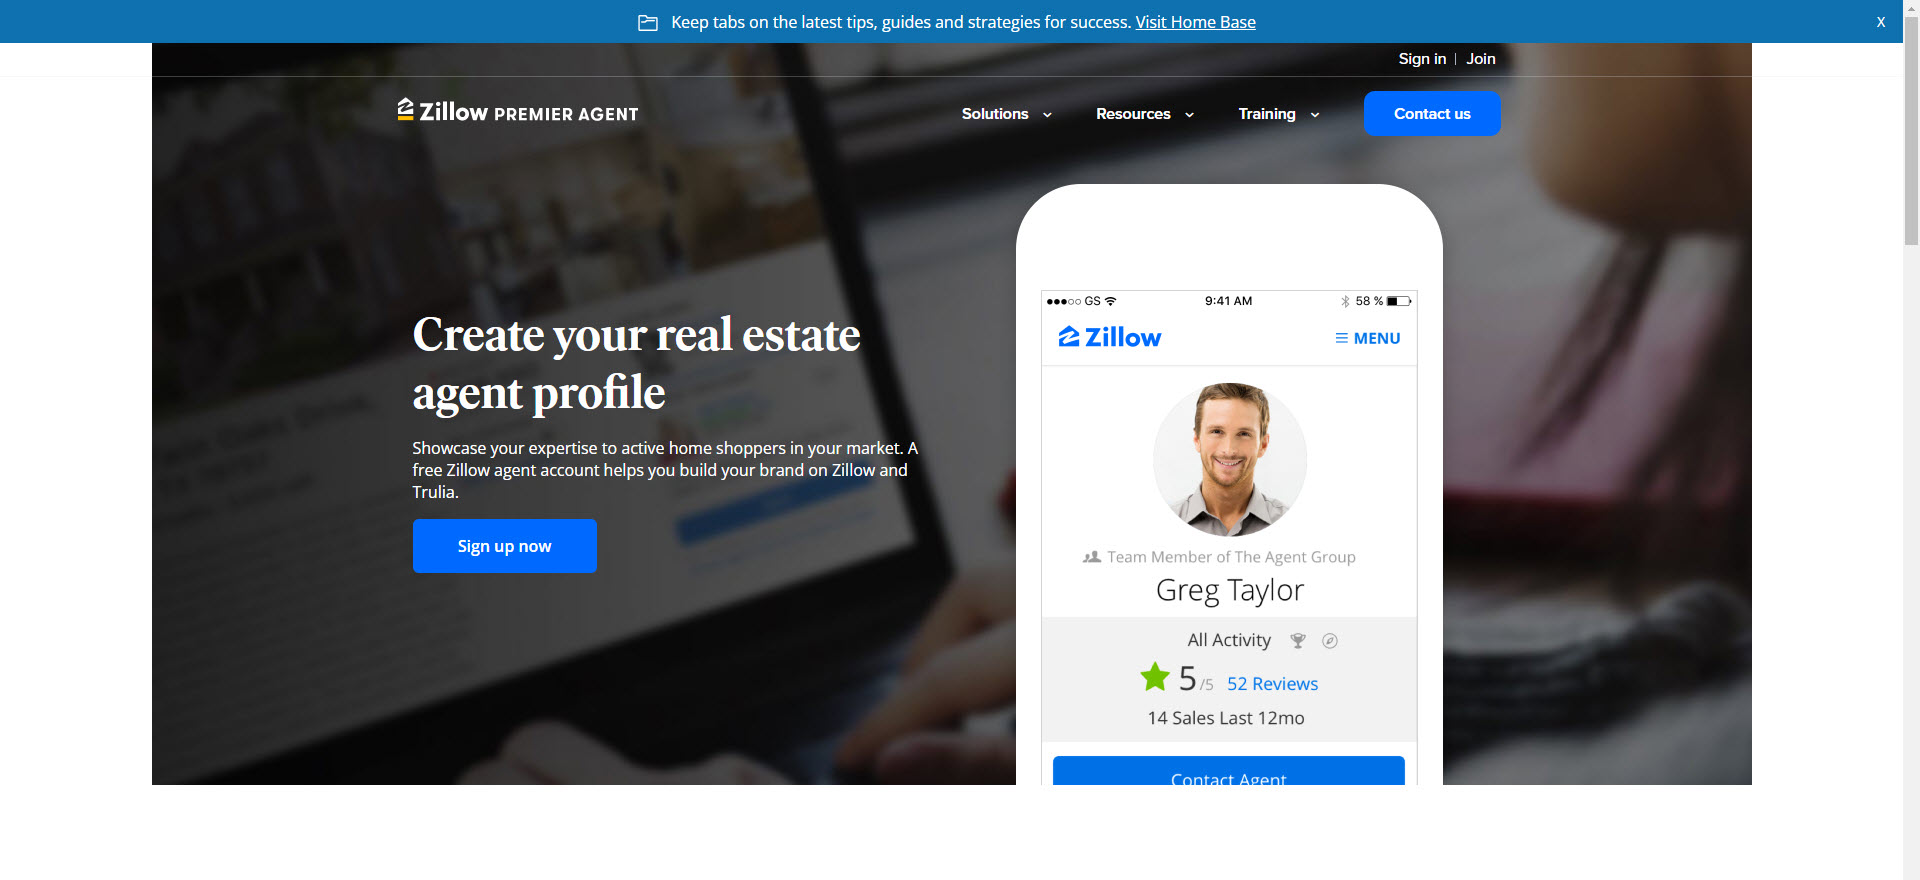 Realtor Lead Generation With Zillow Premier